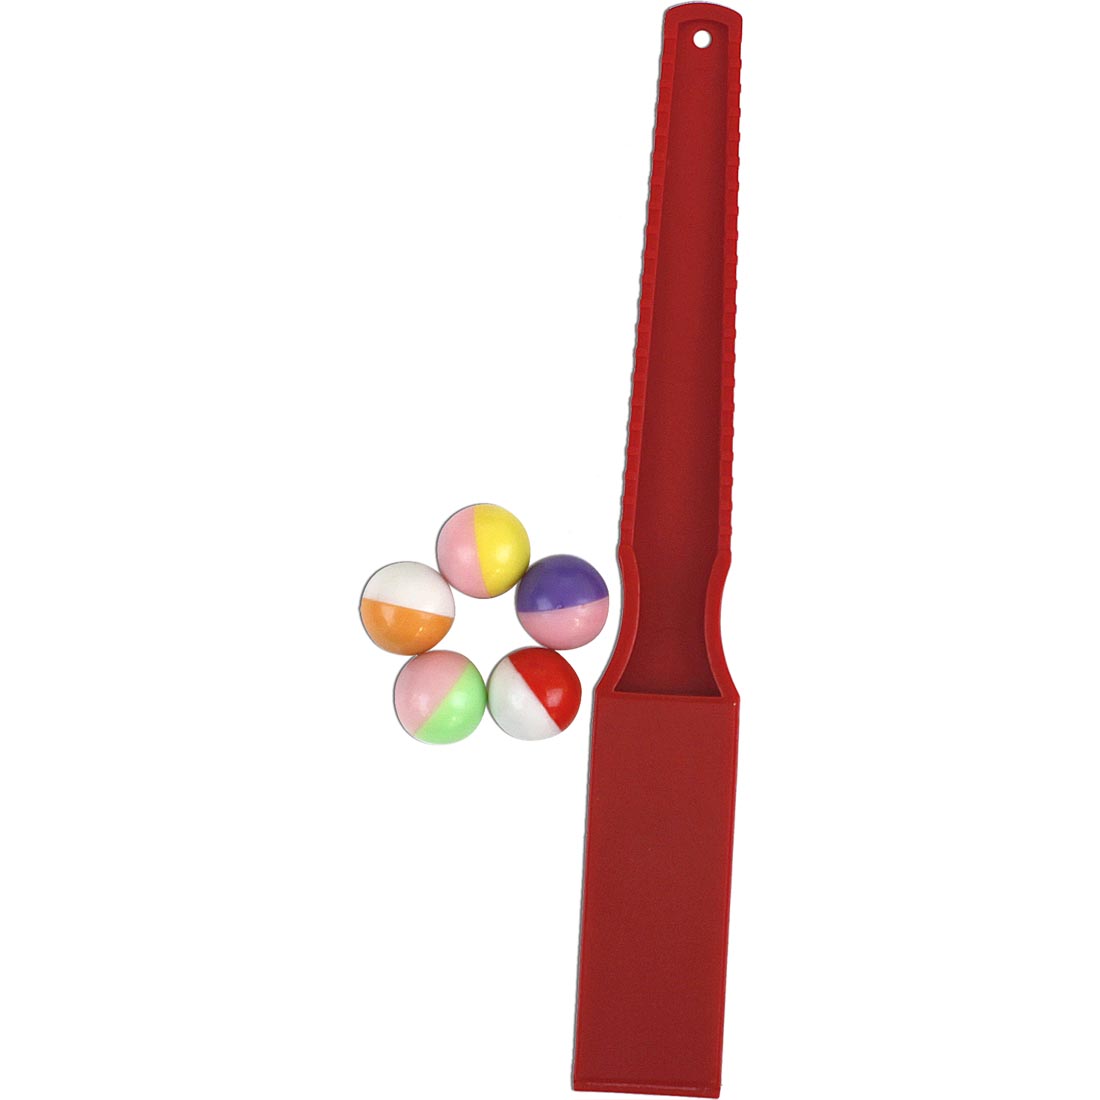 Magnet Wand With Five Magnet Marbles by Dowling Magnets